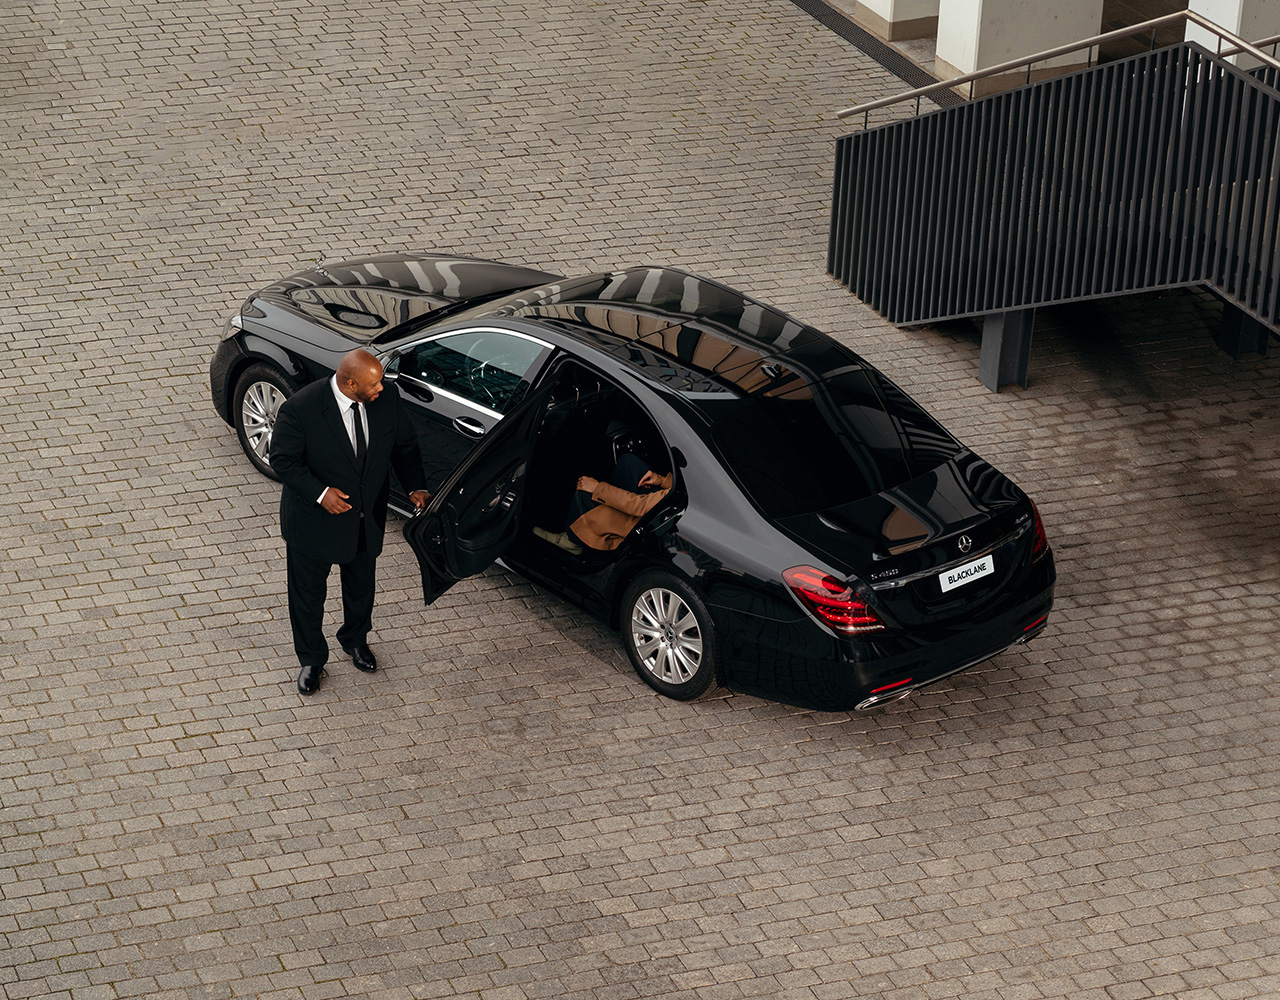 A well-dressed chauffeur opens the door of his stylish vehicle.